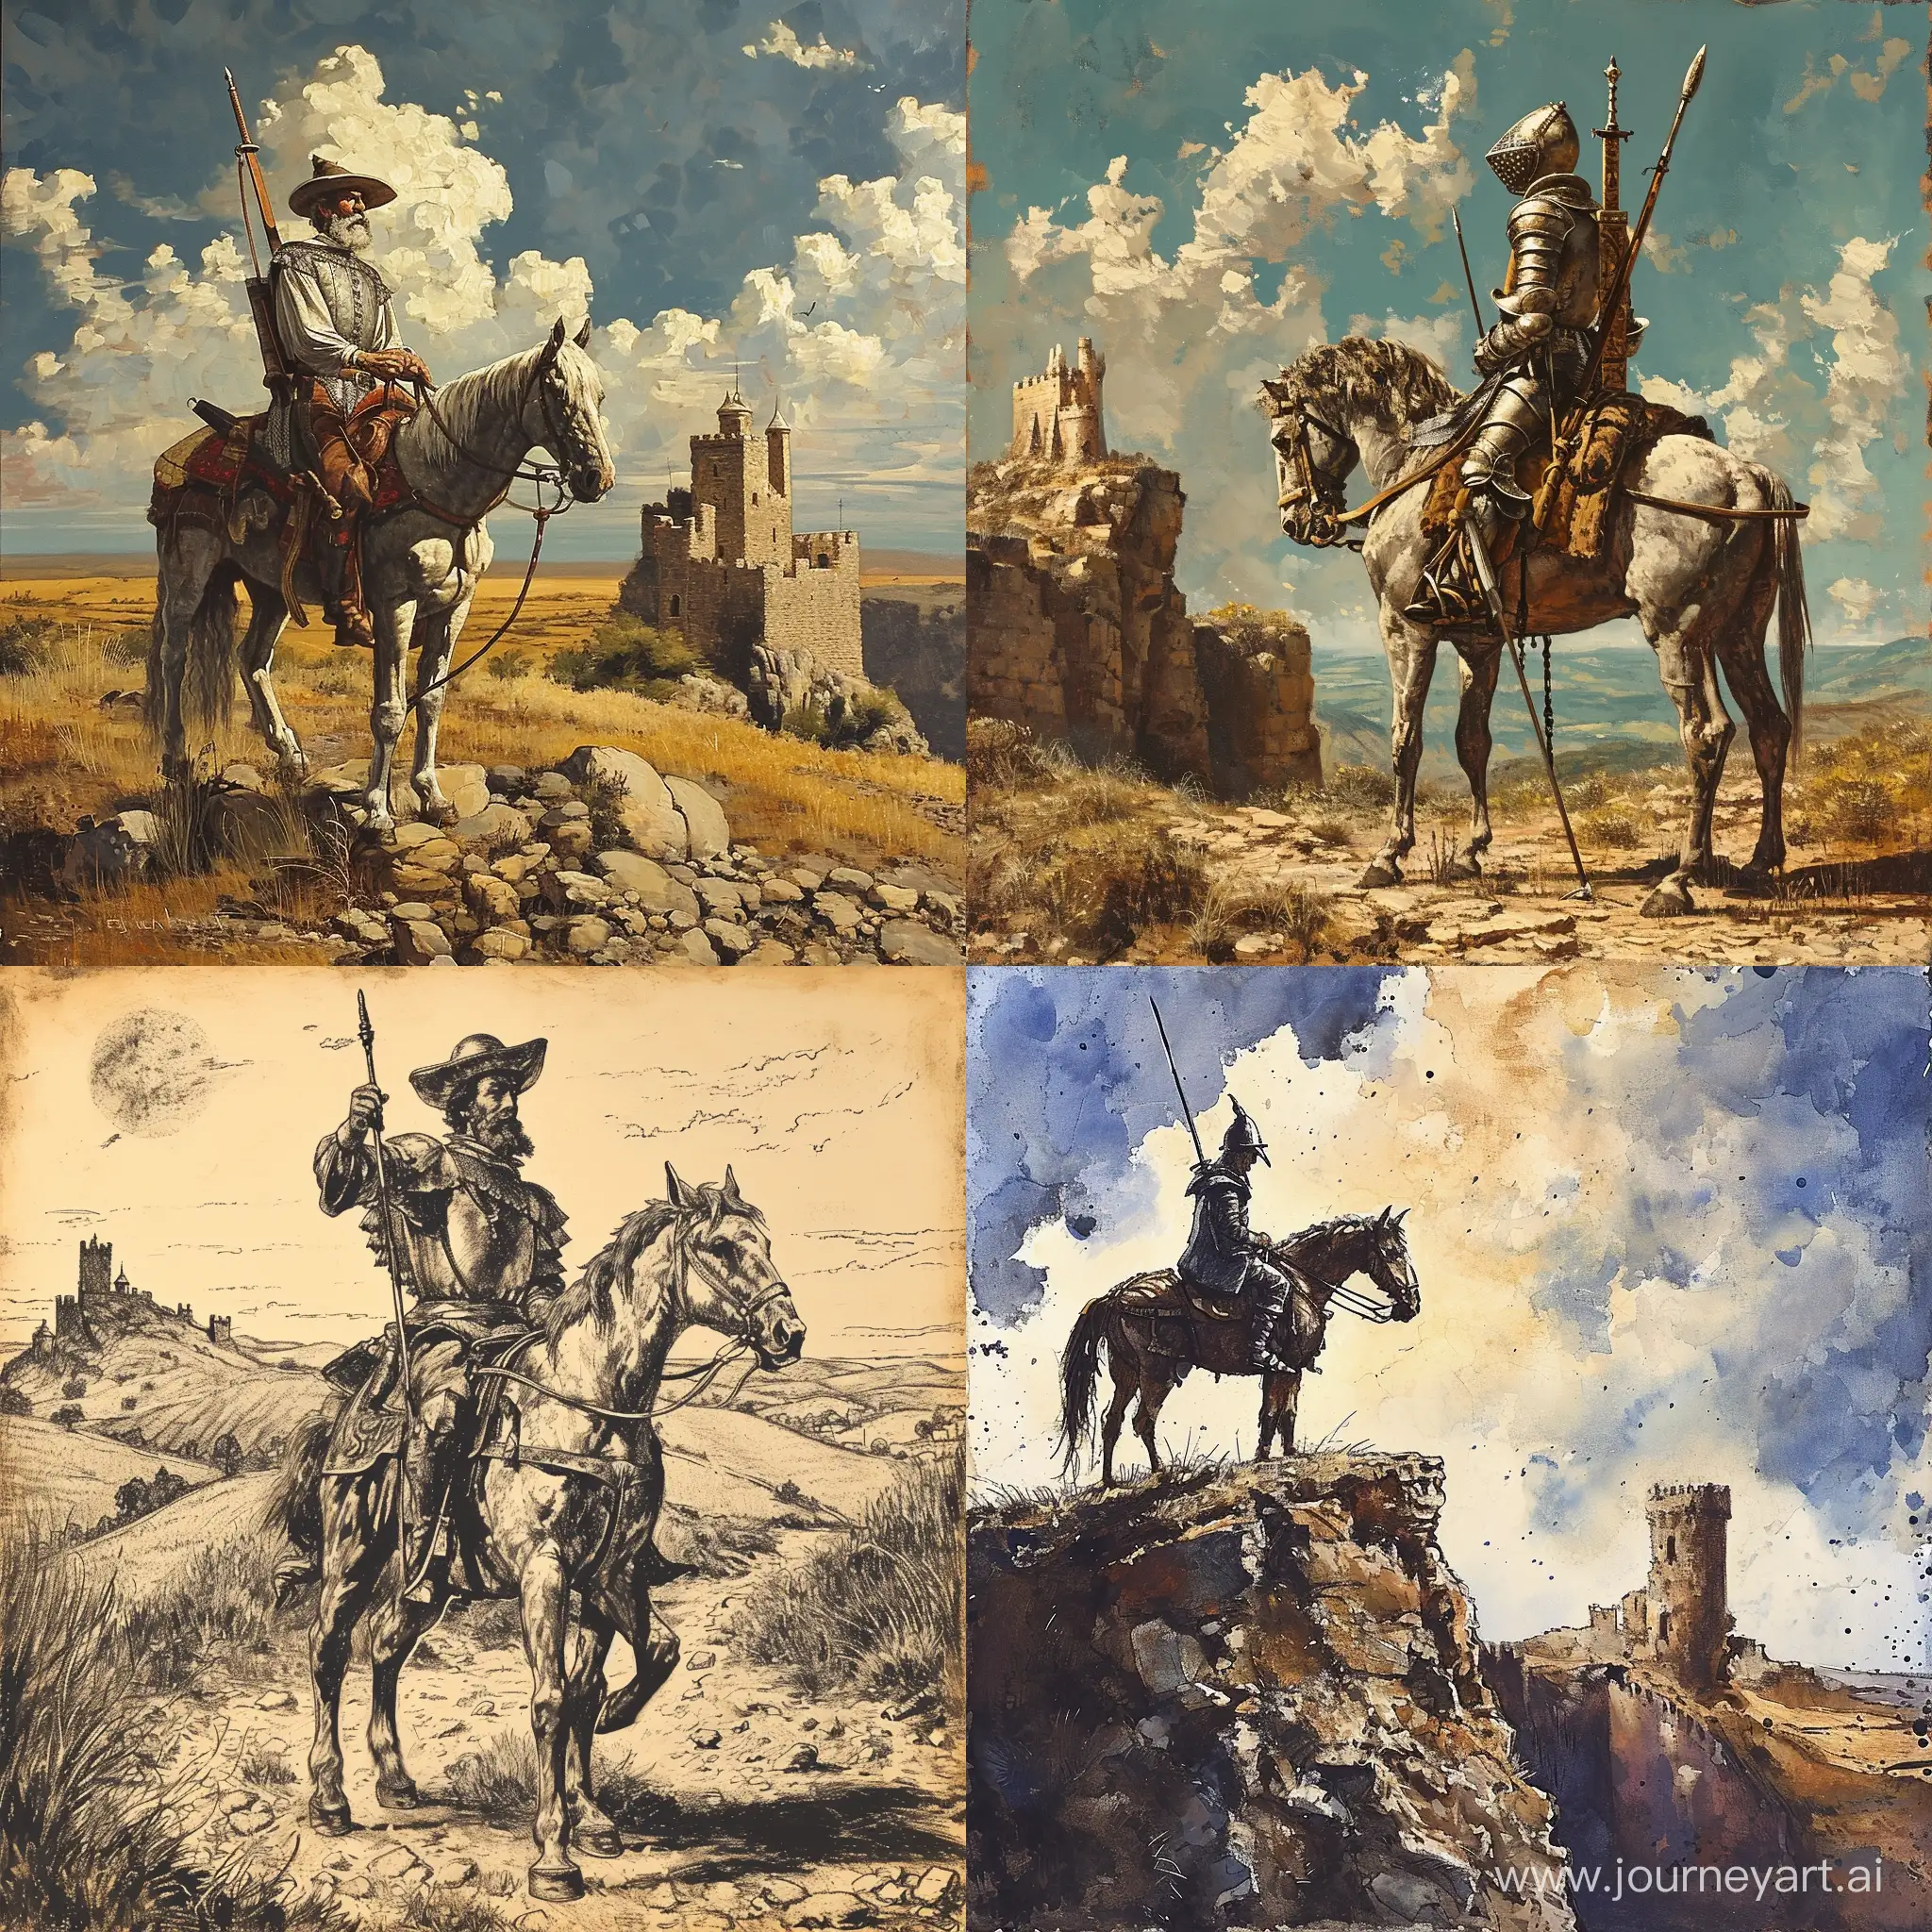 Don-Quixote-Art-Vintage-Illustration-with-6-Versions-and-11-Aspect-Ratio